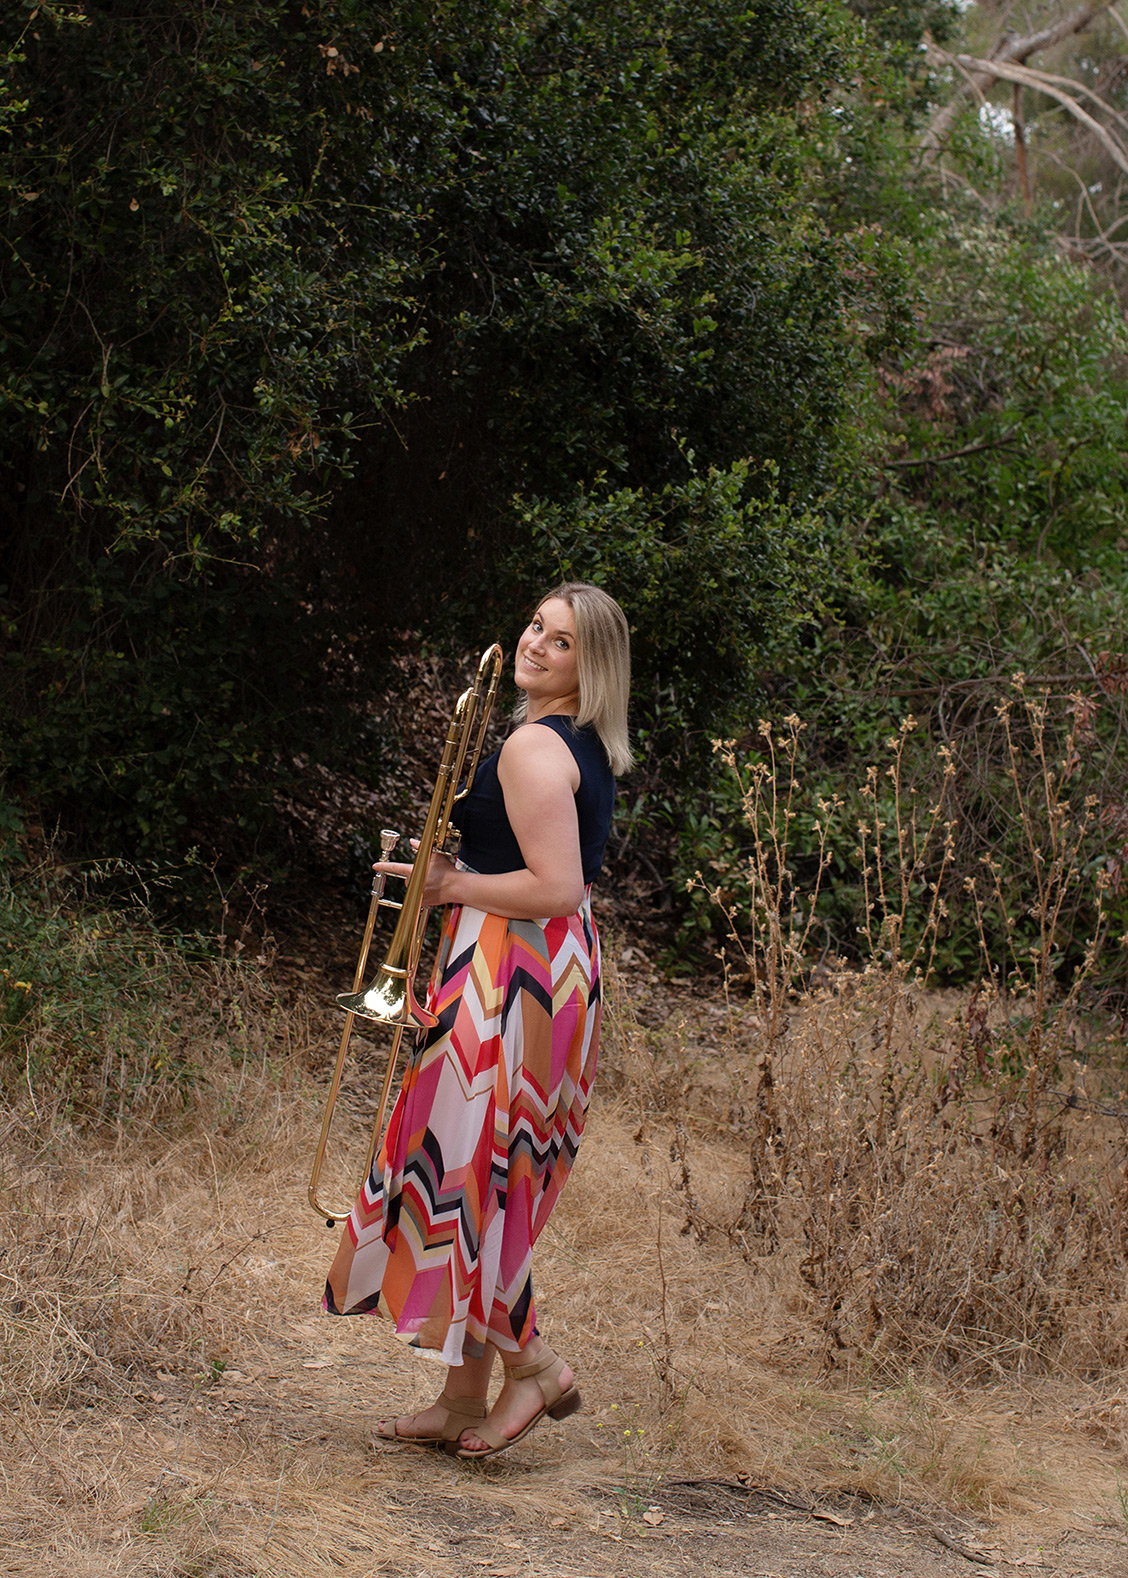 Portrait of Trombonist Hillary Simms taken for the New York Times in Los Angeles by photographer Kimberly Genevieve